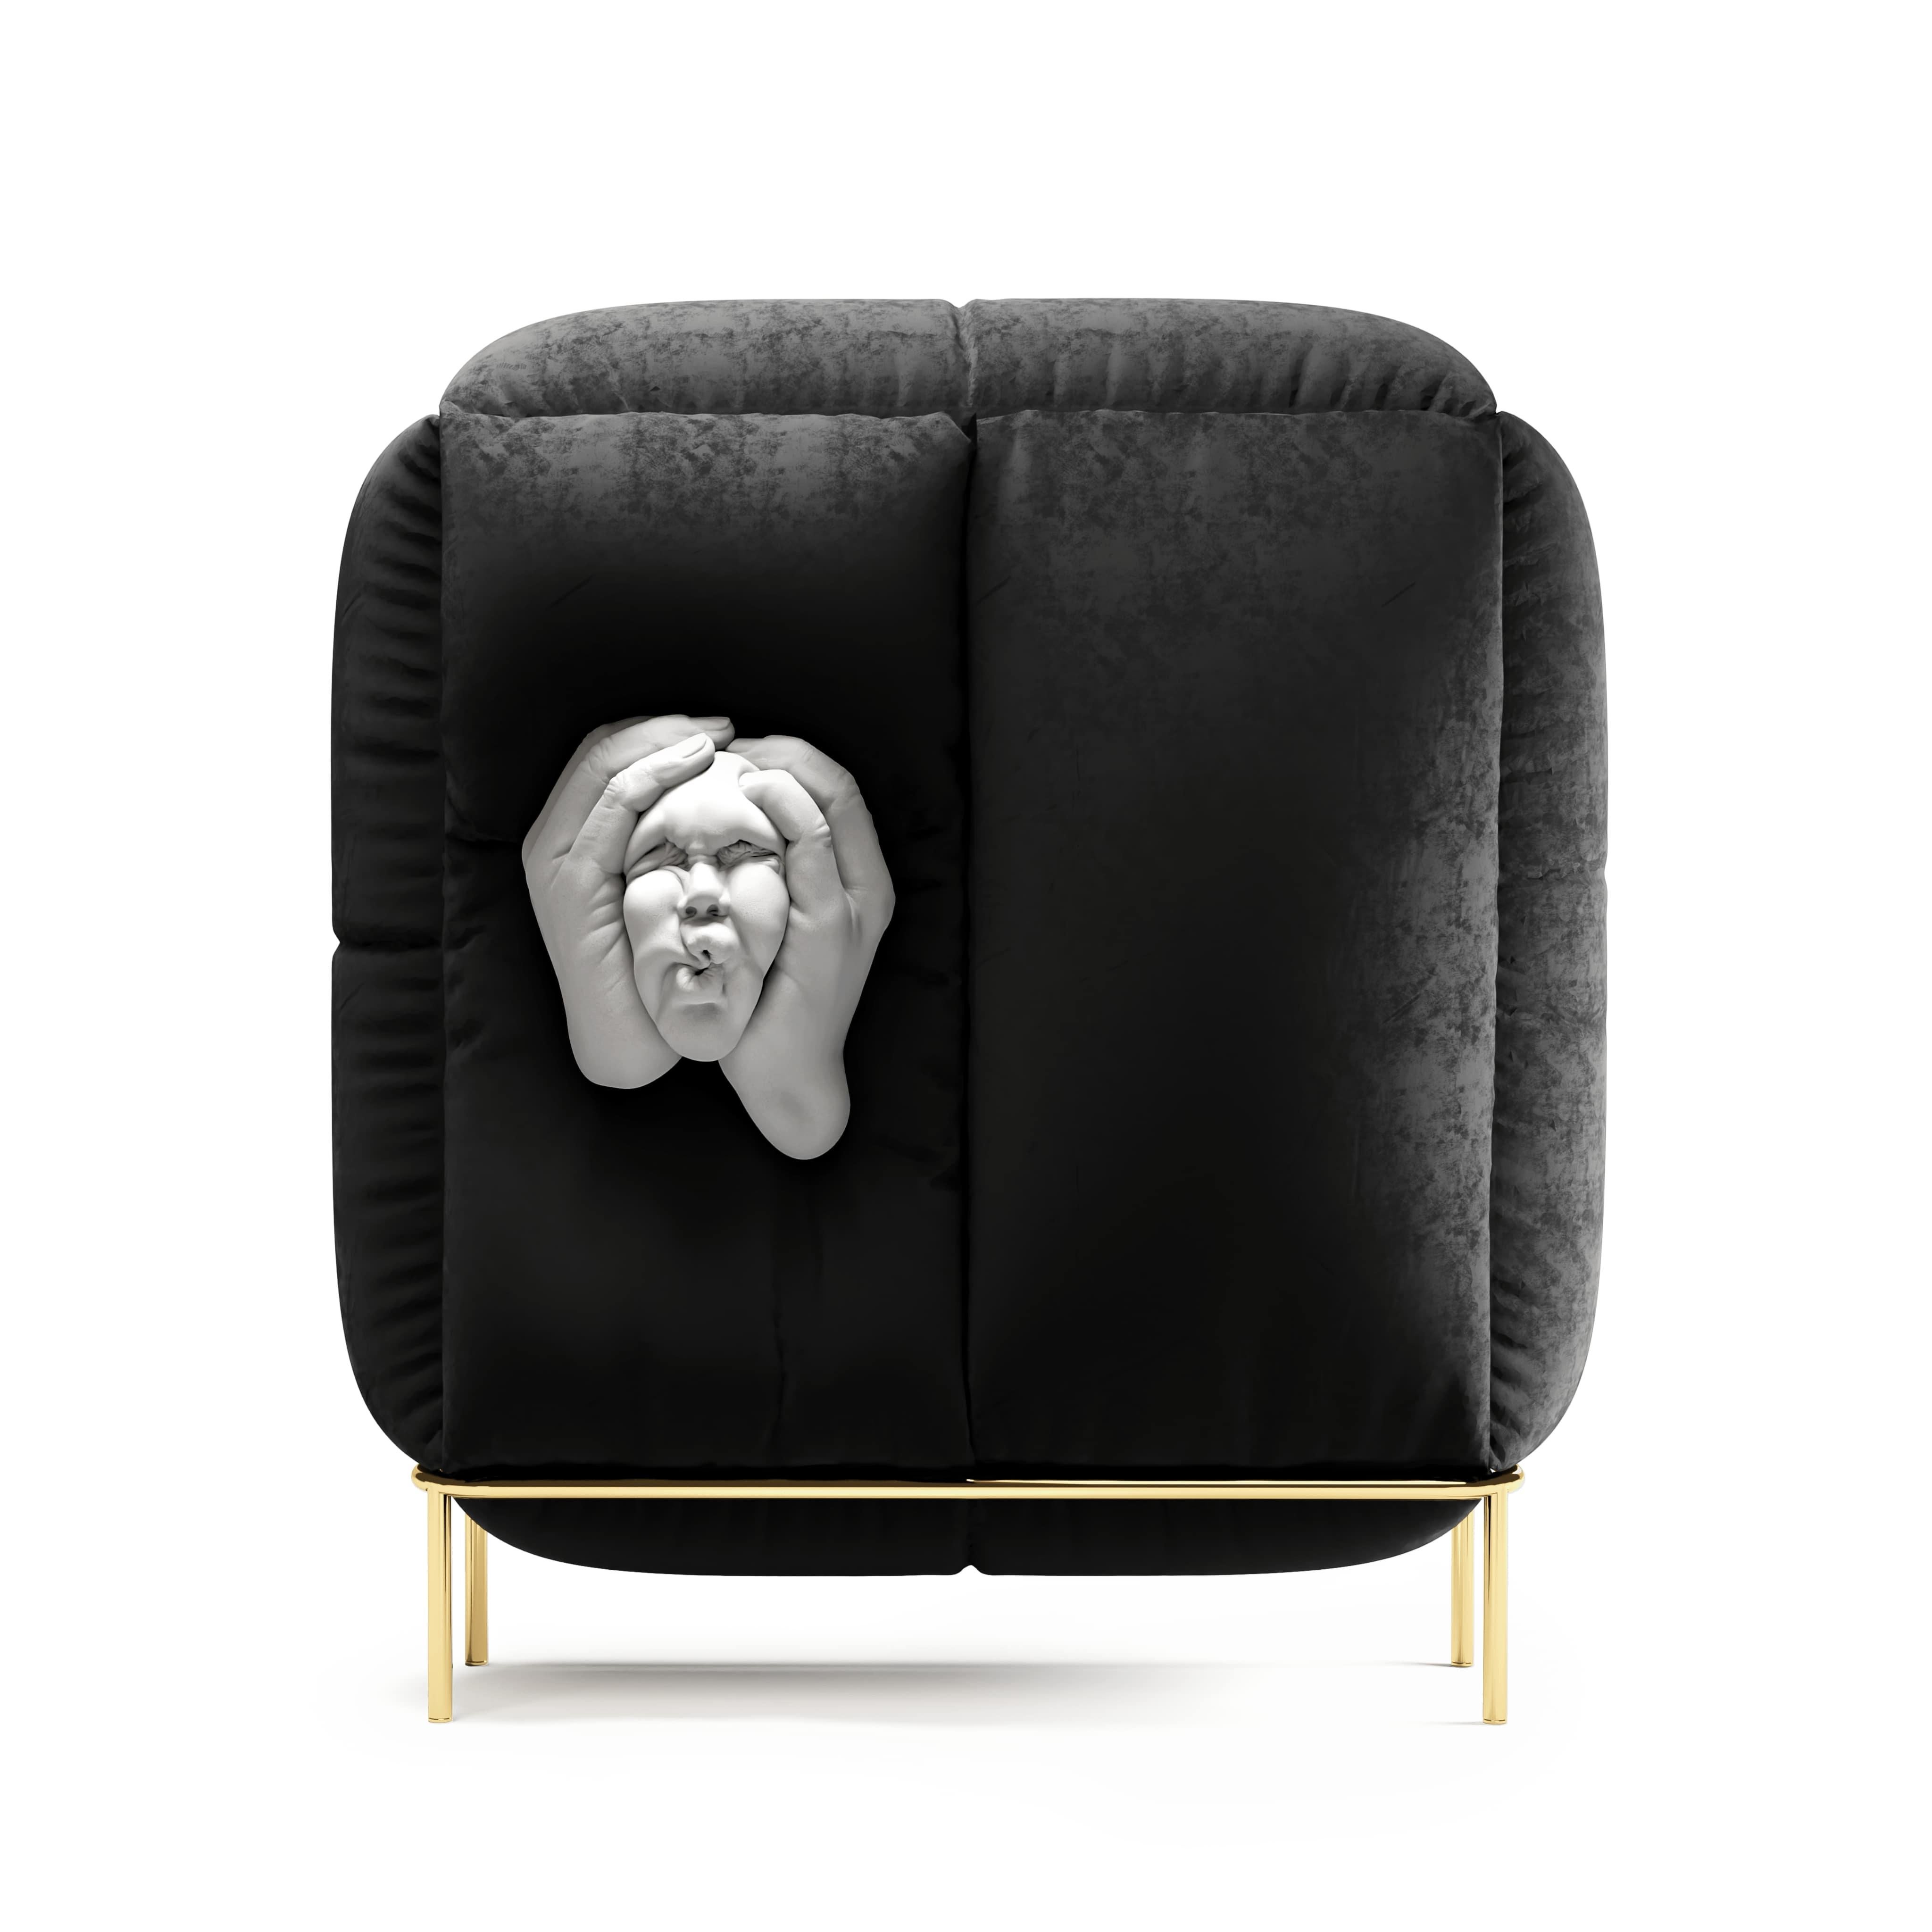 The realist sculptural techniques that is a signature of the Hong-Kong based artist Johnson Tsang's work, capture the surreal fantasies of his lucid dream and were implemented by Studio Pastina in an oversized cabinet collection upholstered in